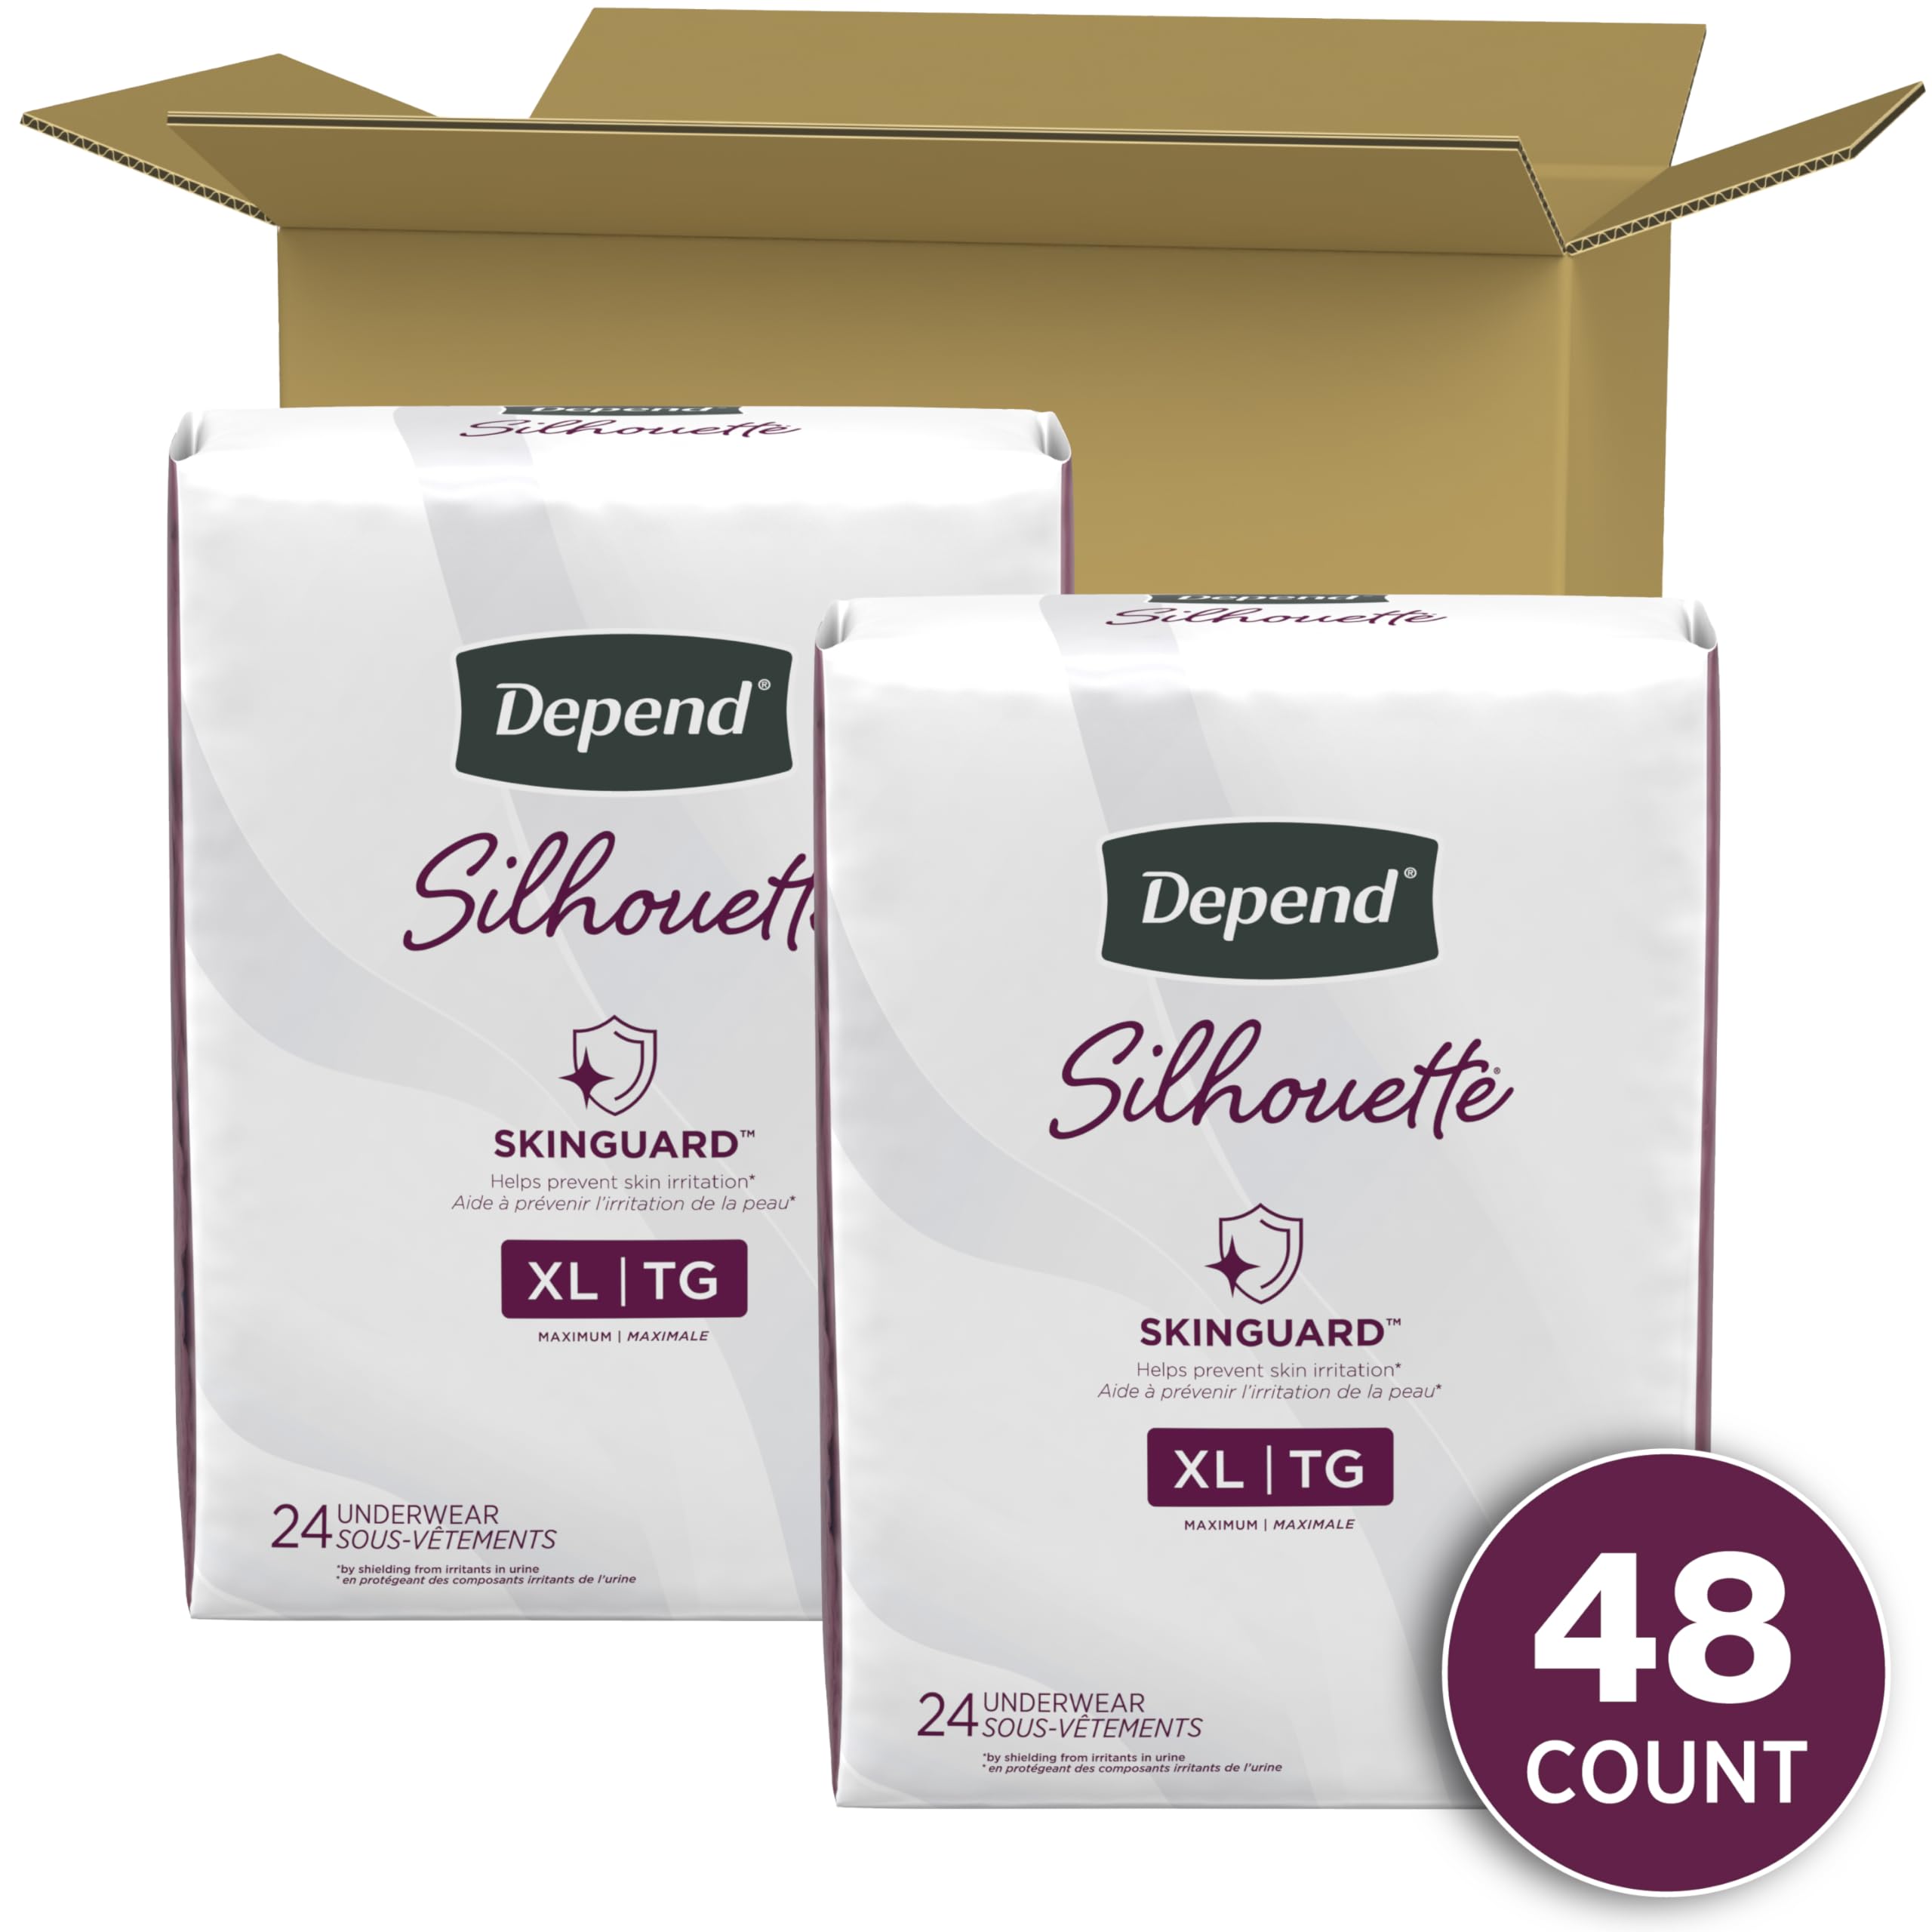 Depend Silhouette Women's Incontinence Underwear, Extra-Large, Maximum Absorbency - 48 Count (2 Packs of 24)